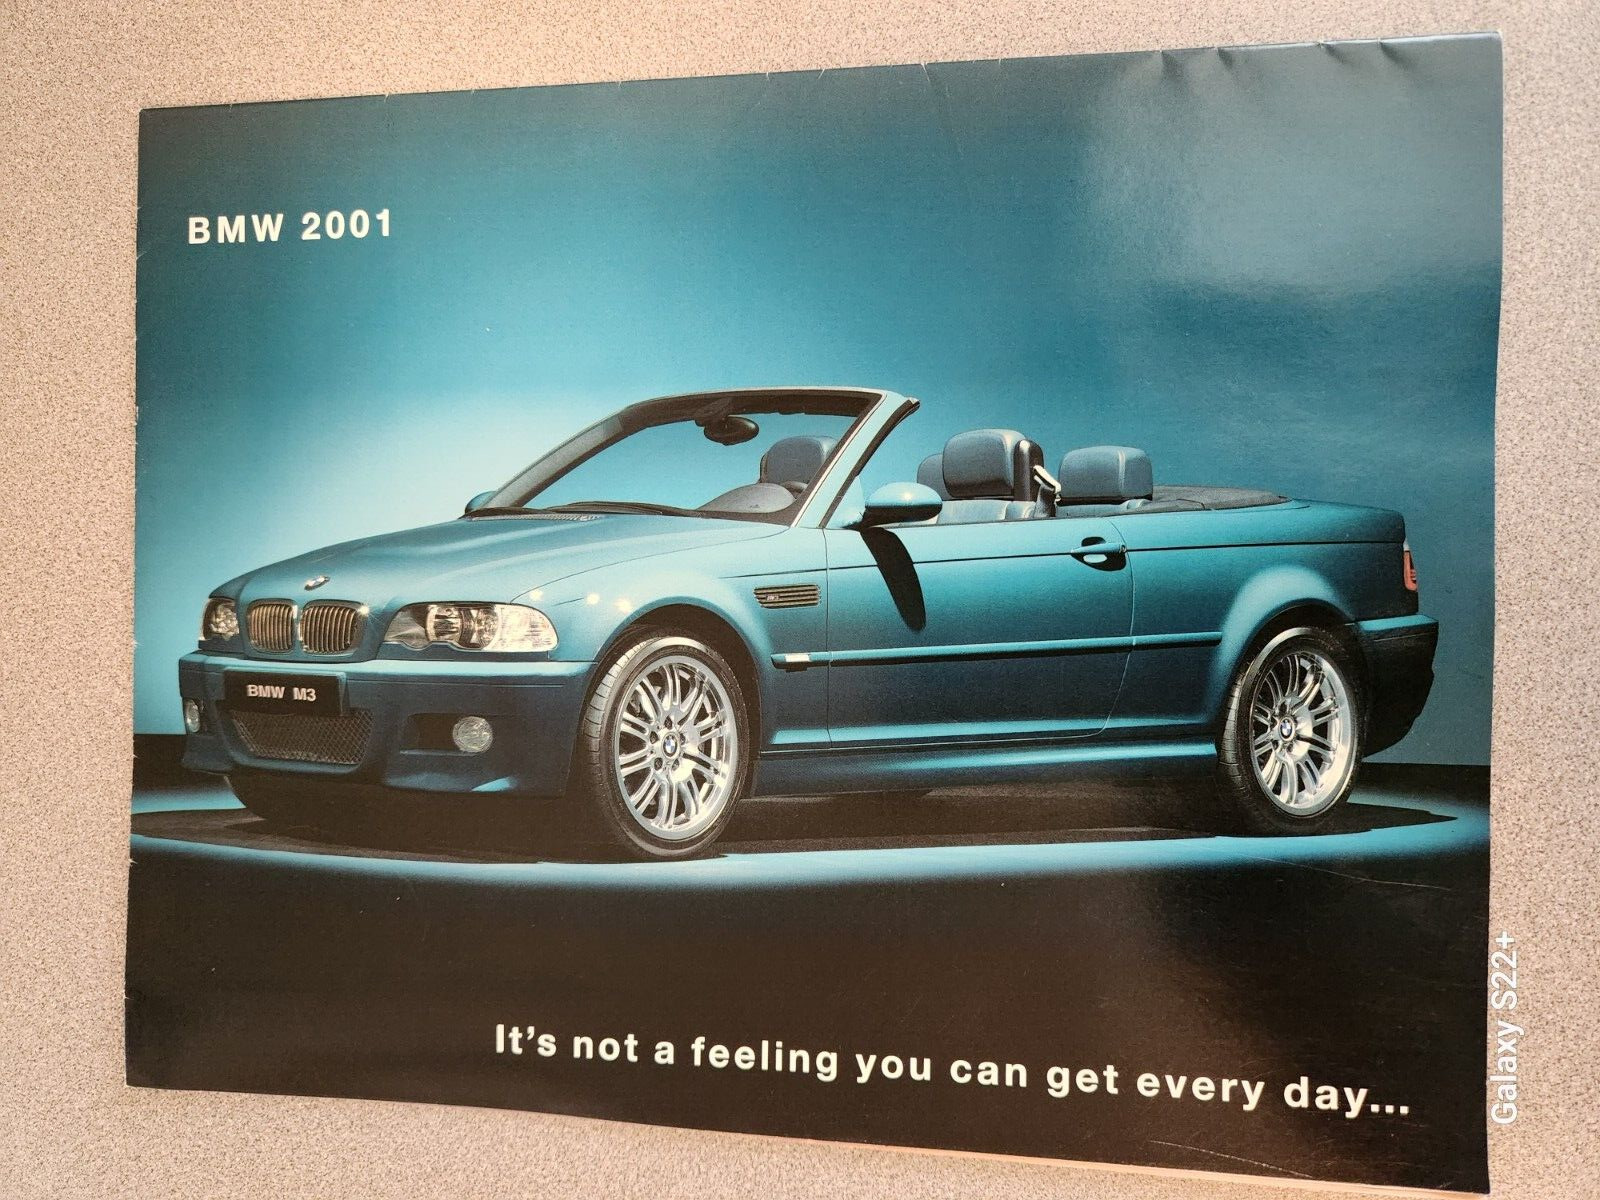 2001 BMW Sales Catalog/Brochure for the M3 Series Sedan Plus 325i, Coupe & more